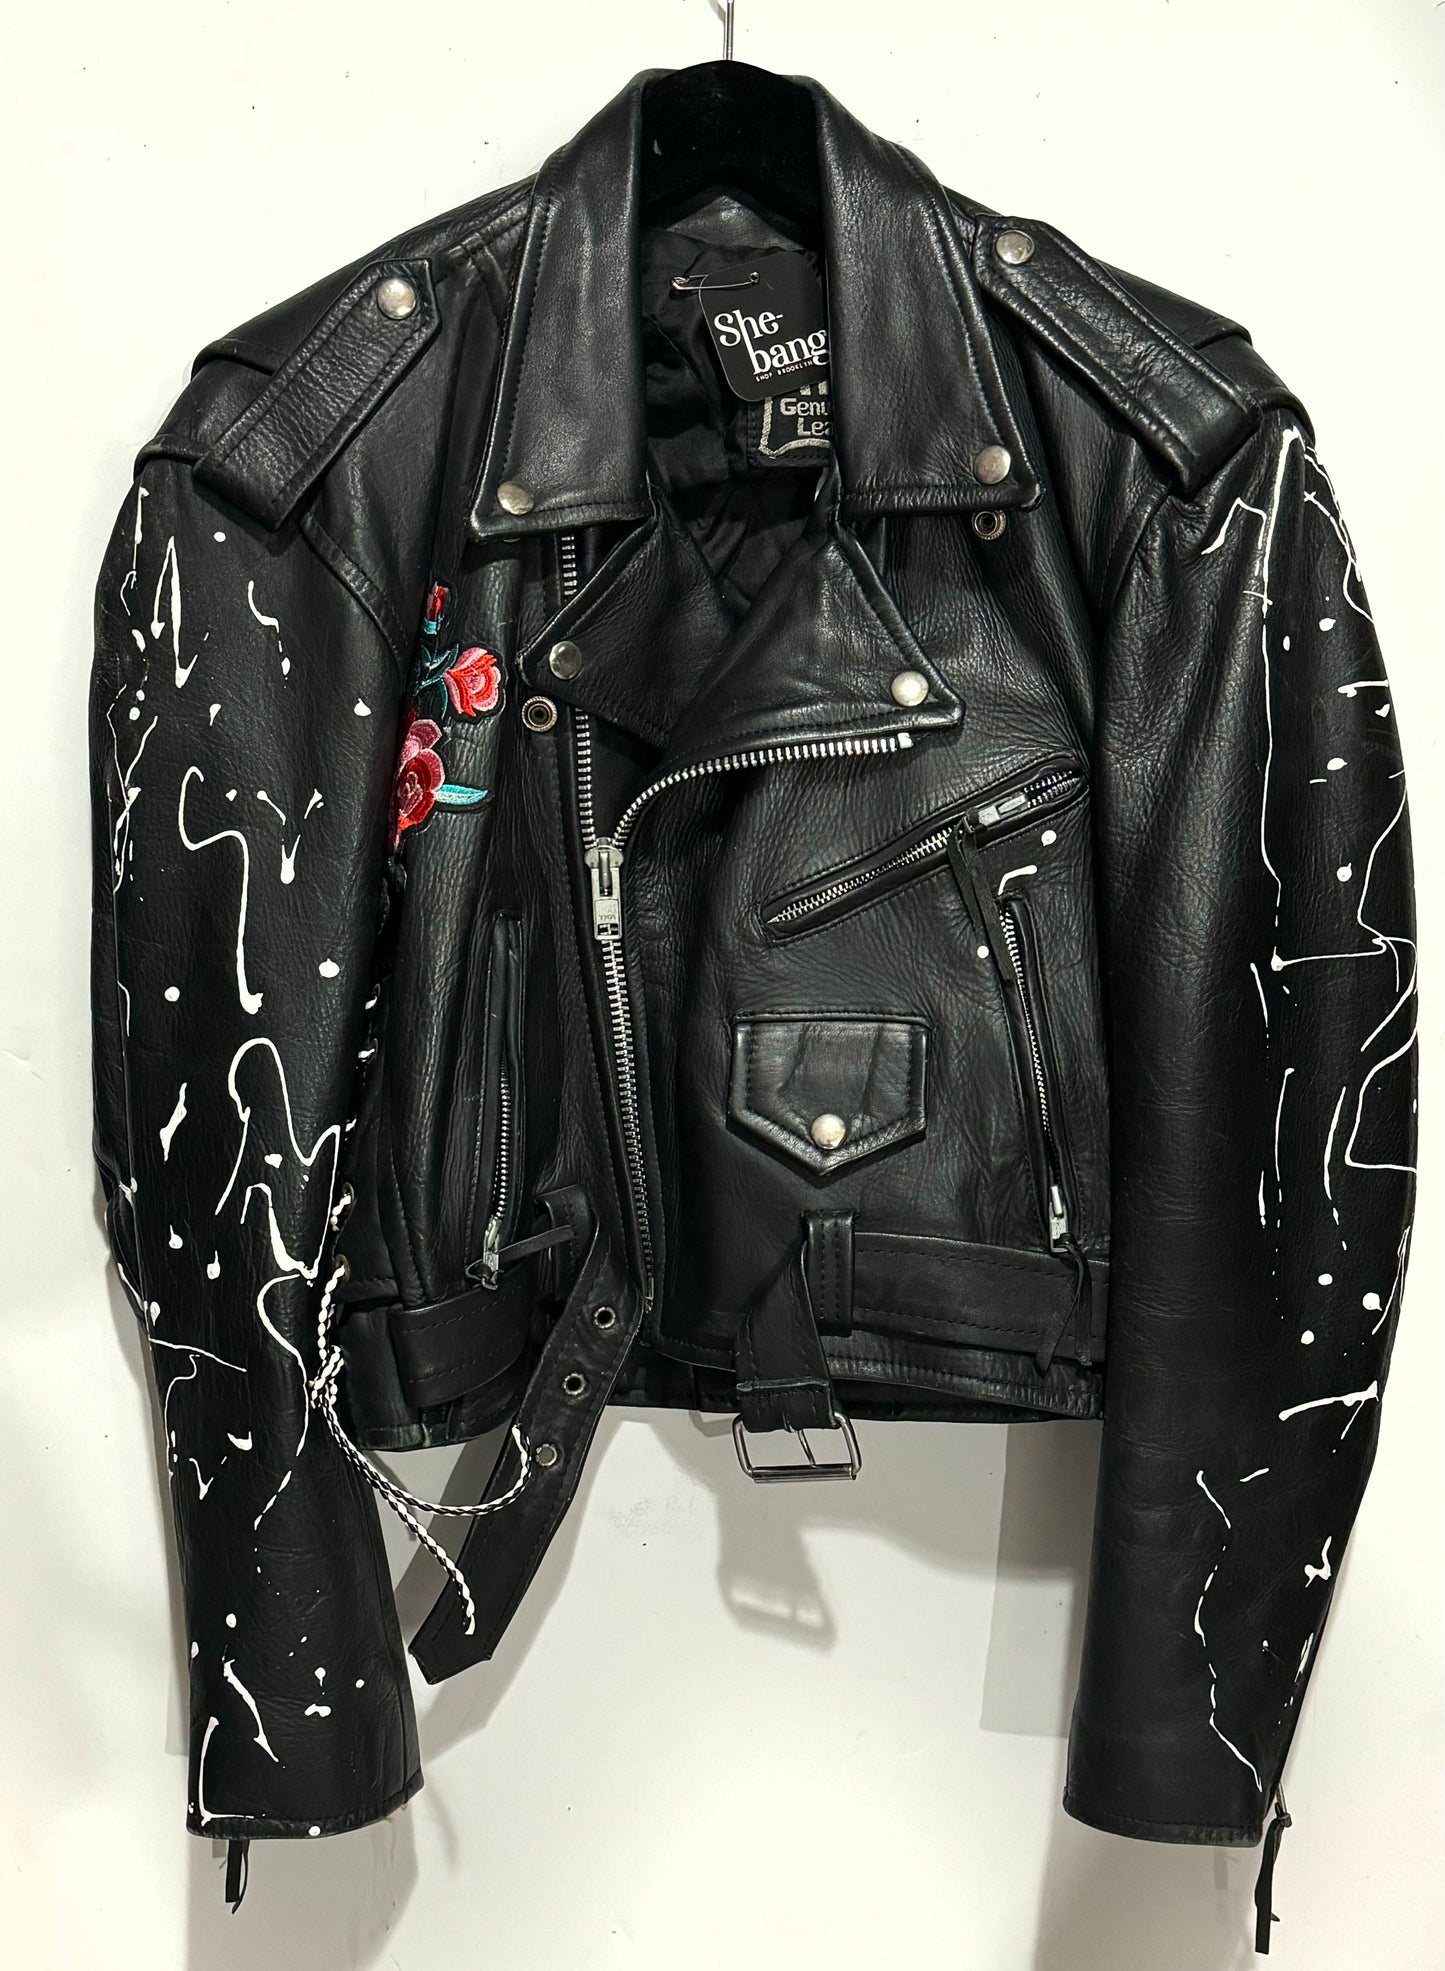 One of a kind Hand Painted Vintage Leather Jacket